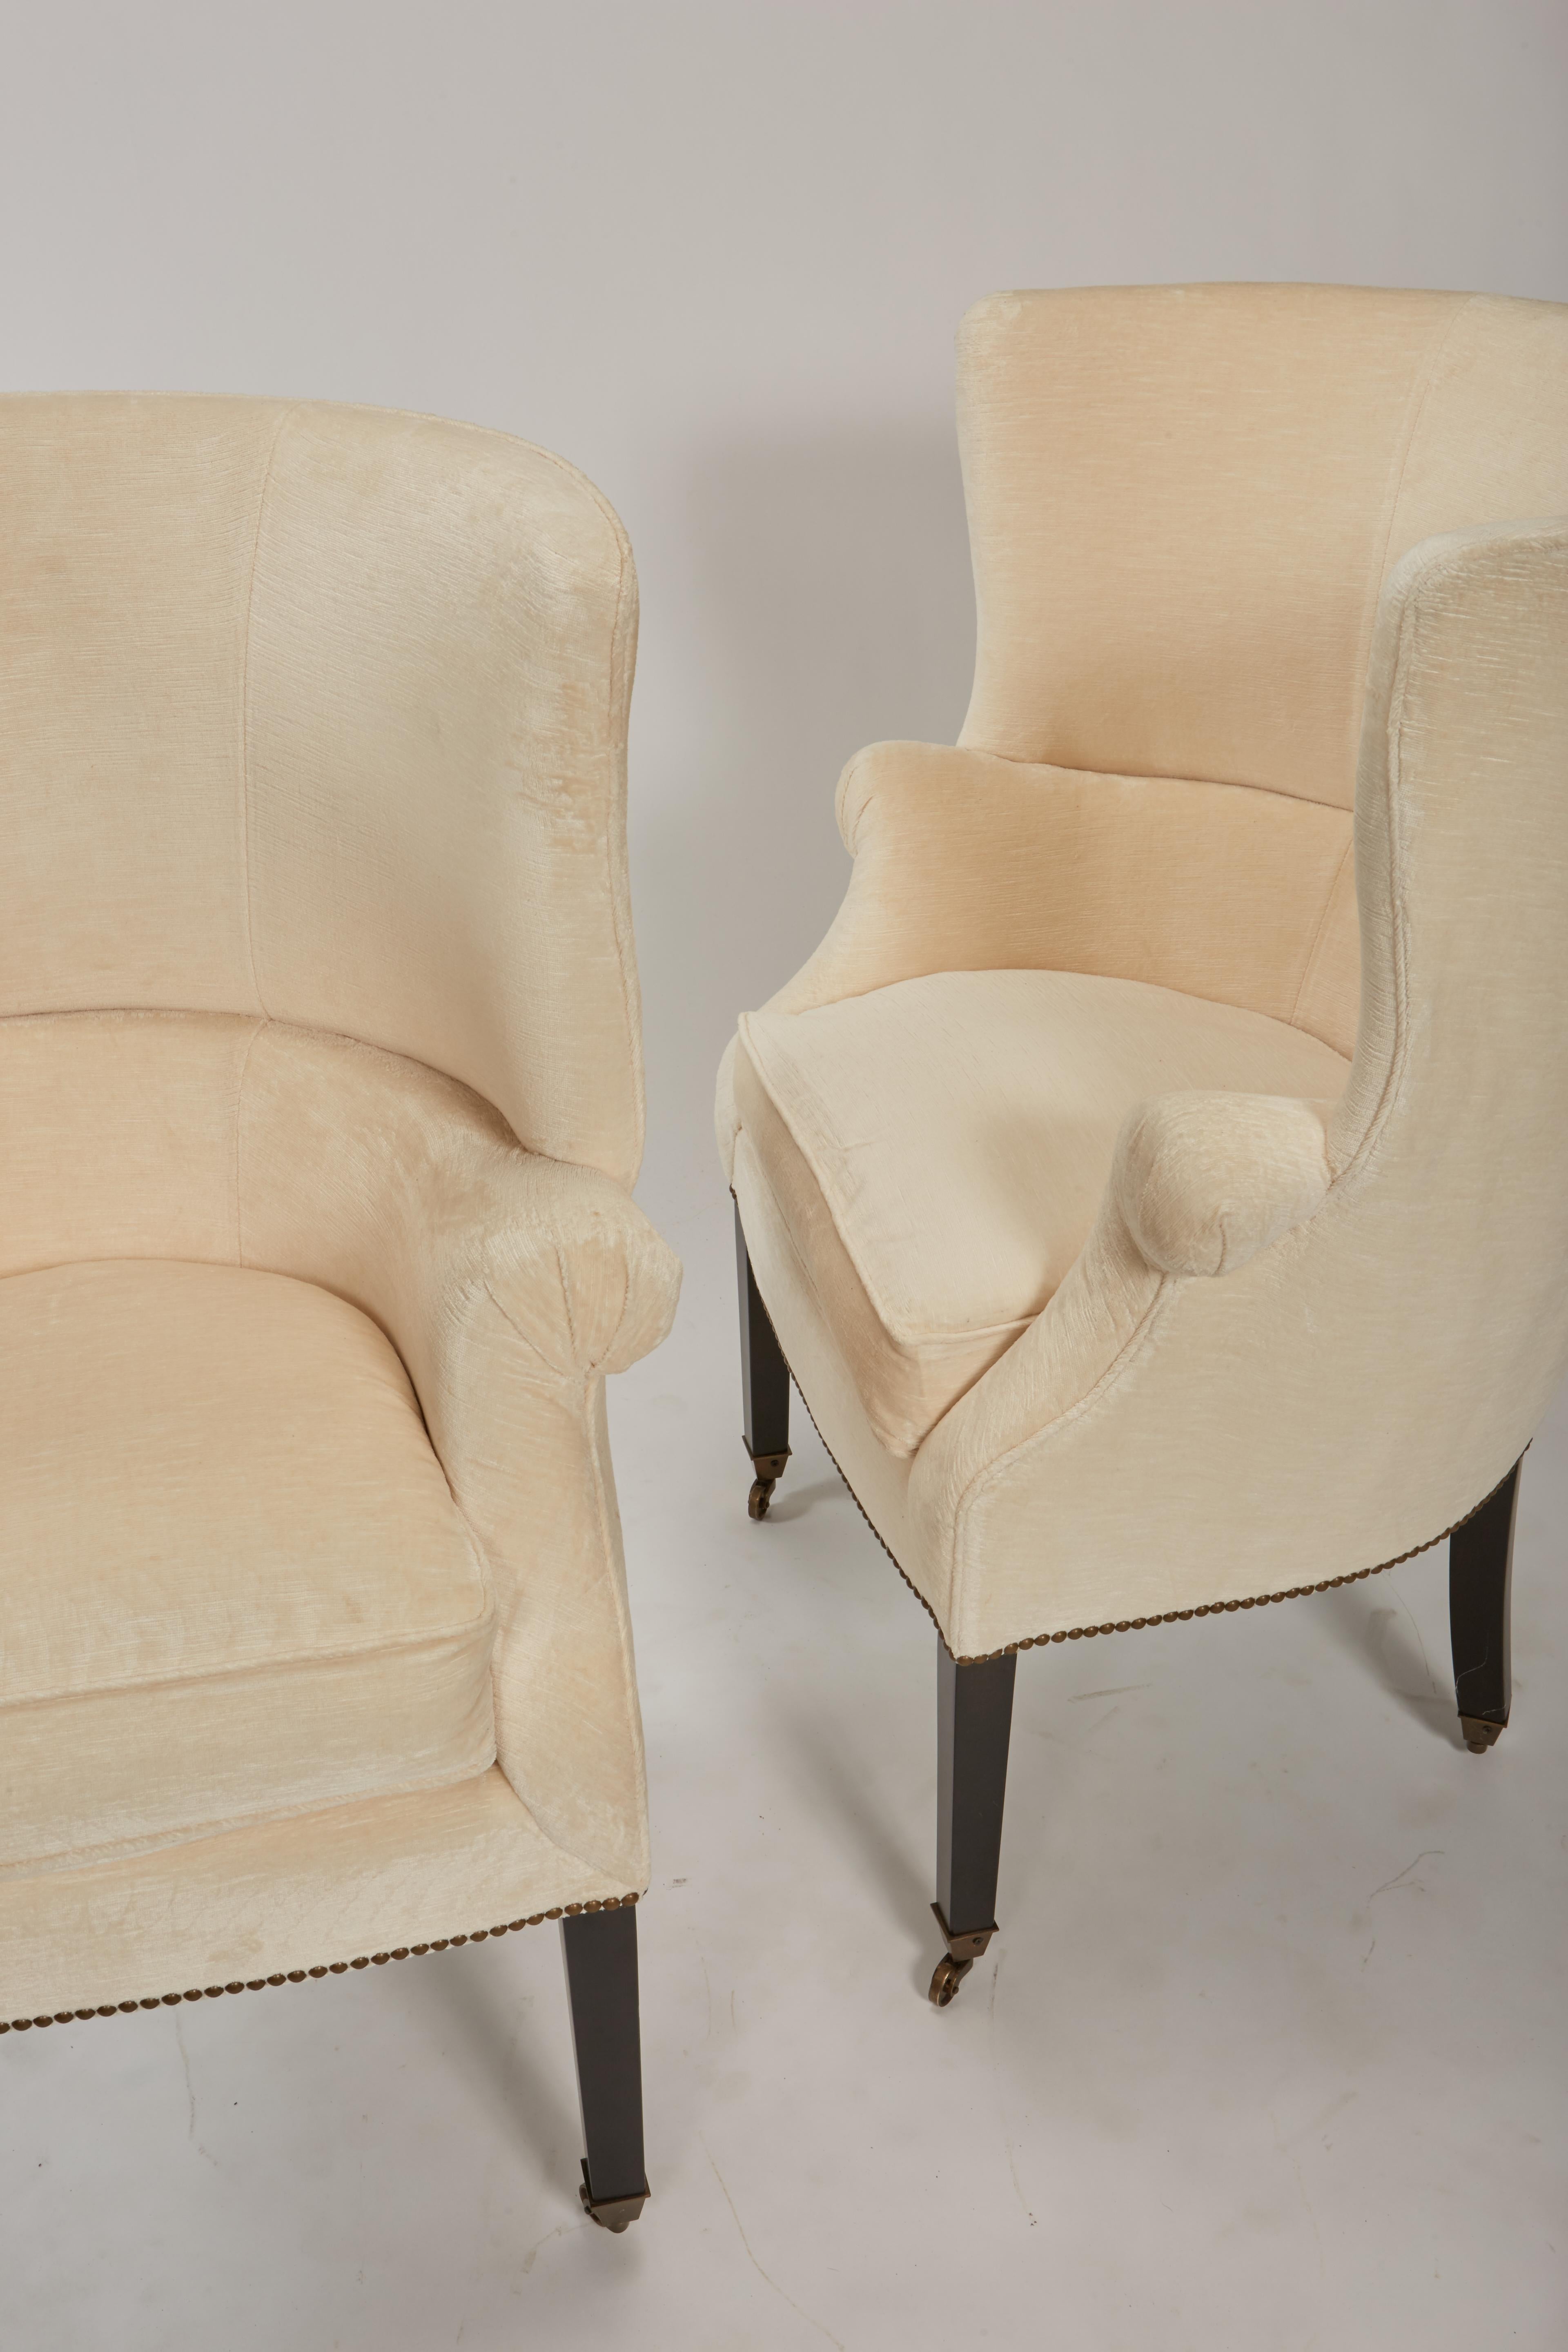 small wing back chairs